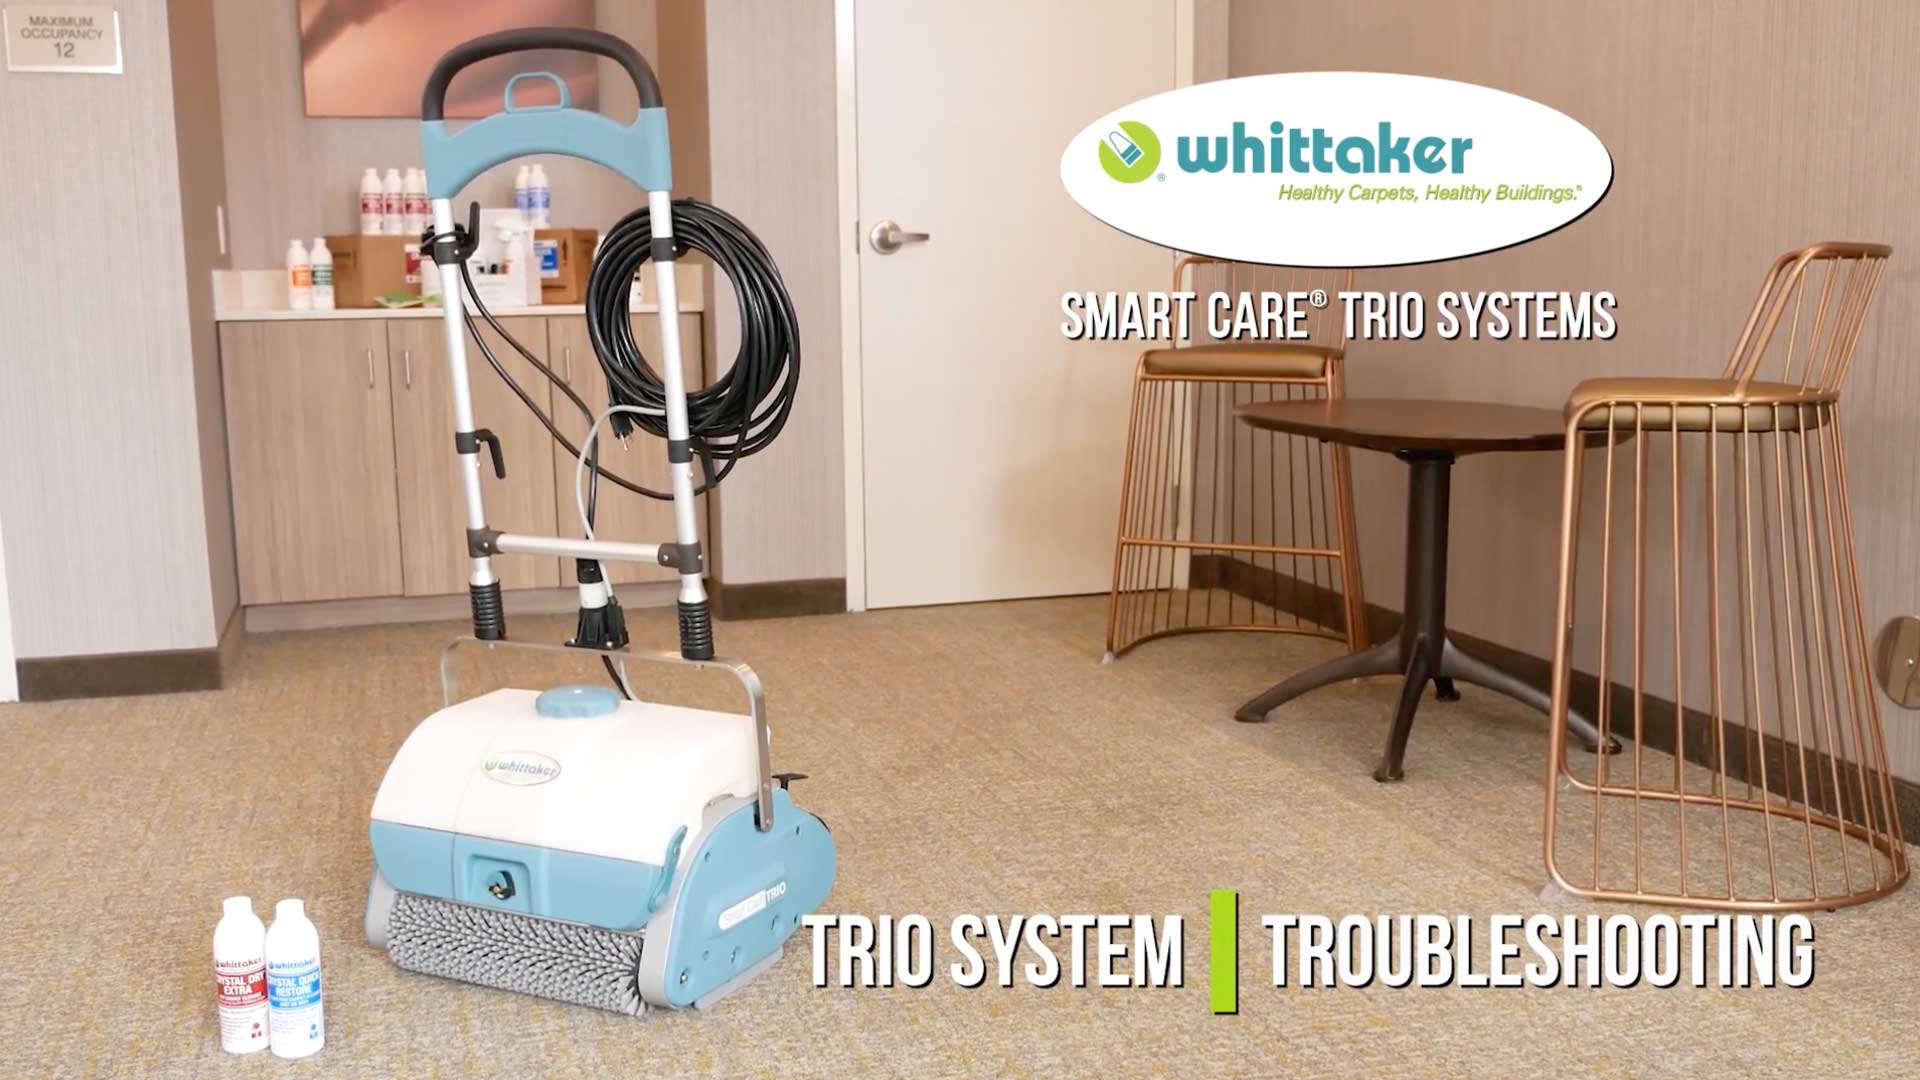 Whittaker Smart Care Trio System Troubleshooting Video